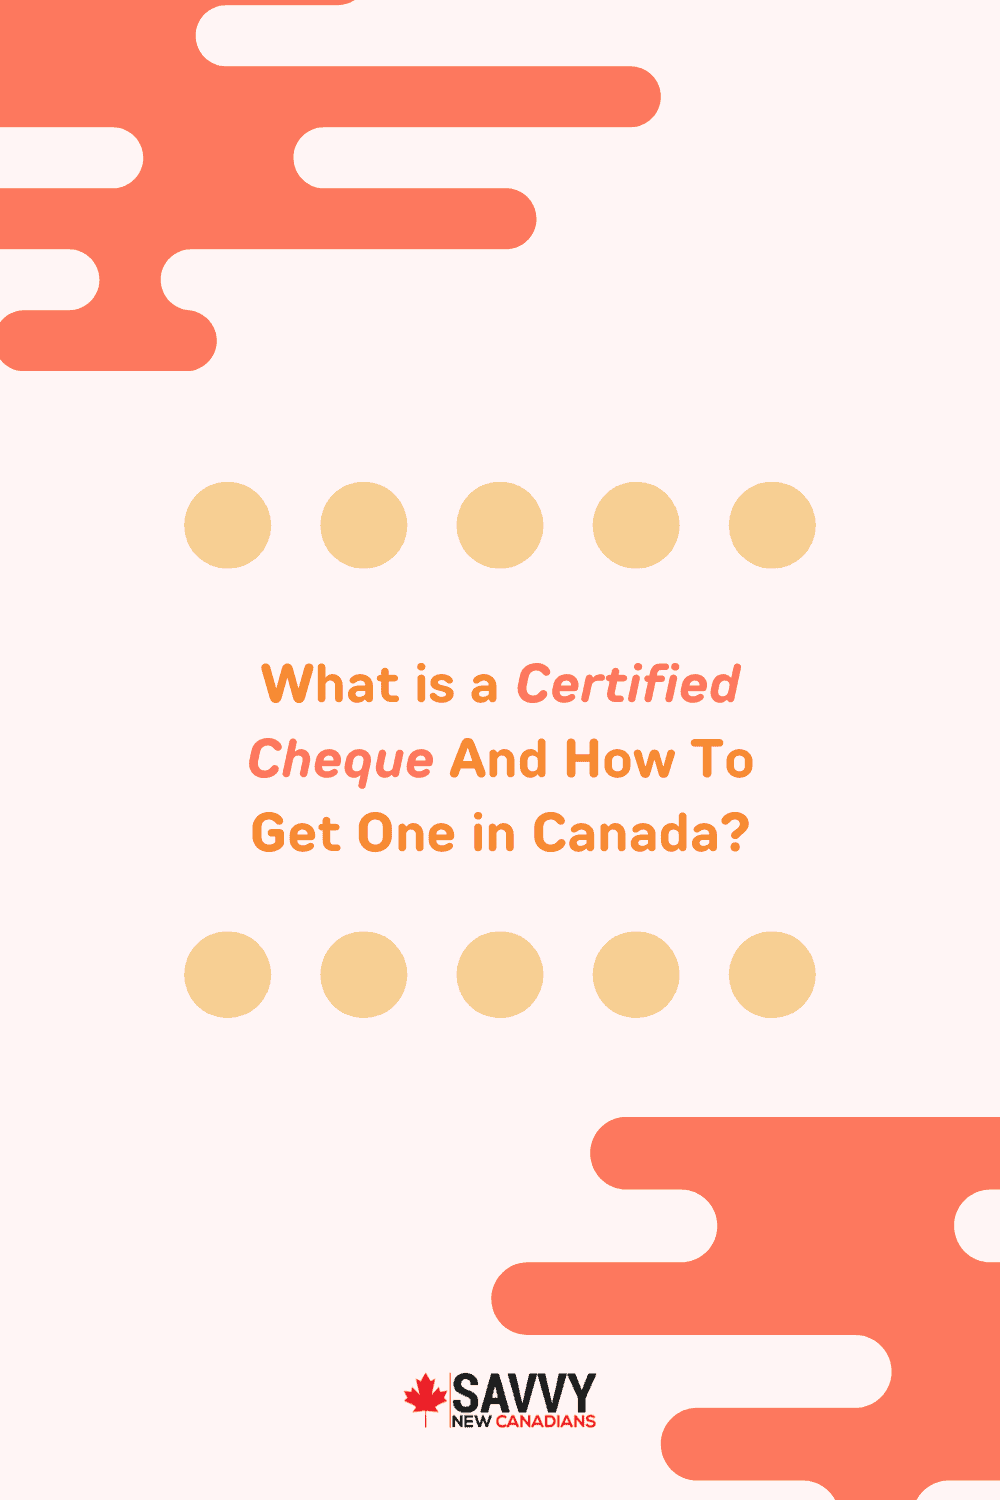 What is a Certified Cheque And How To Get One in Canada?